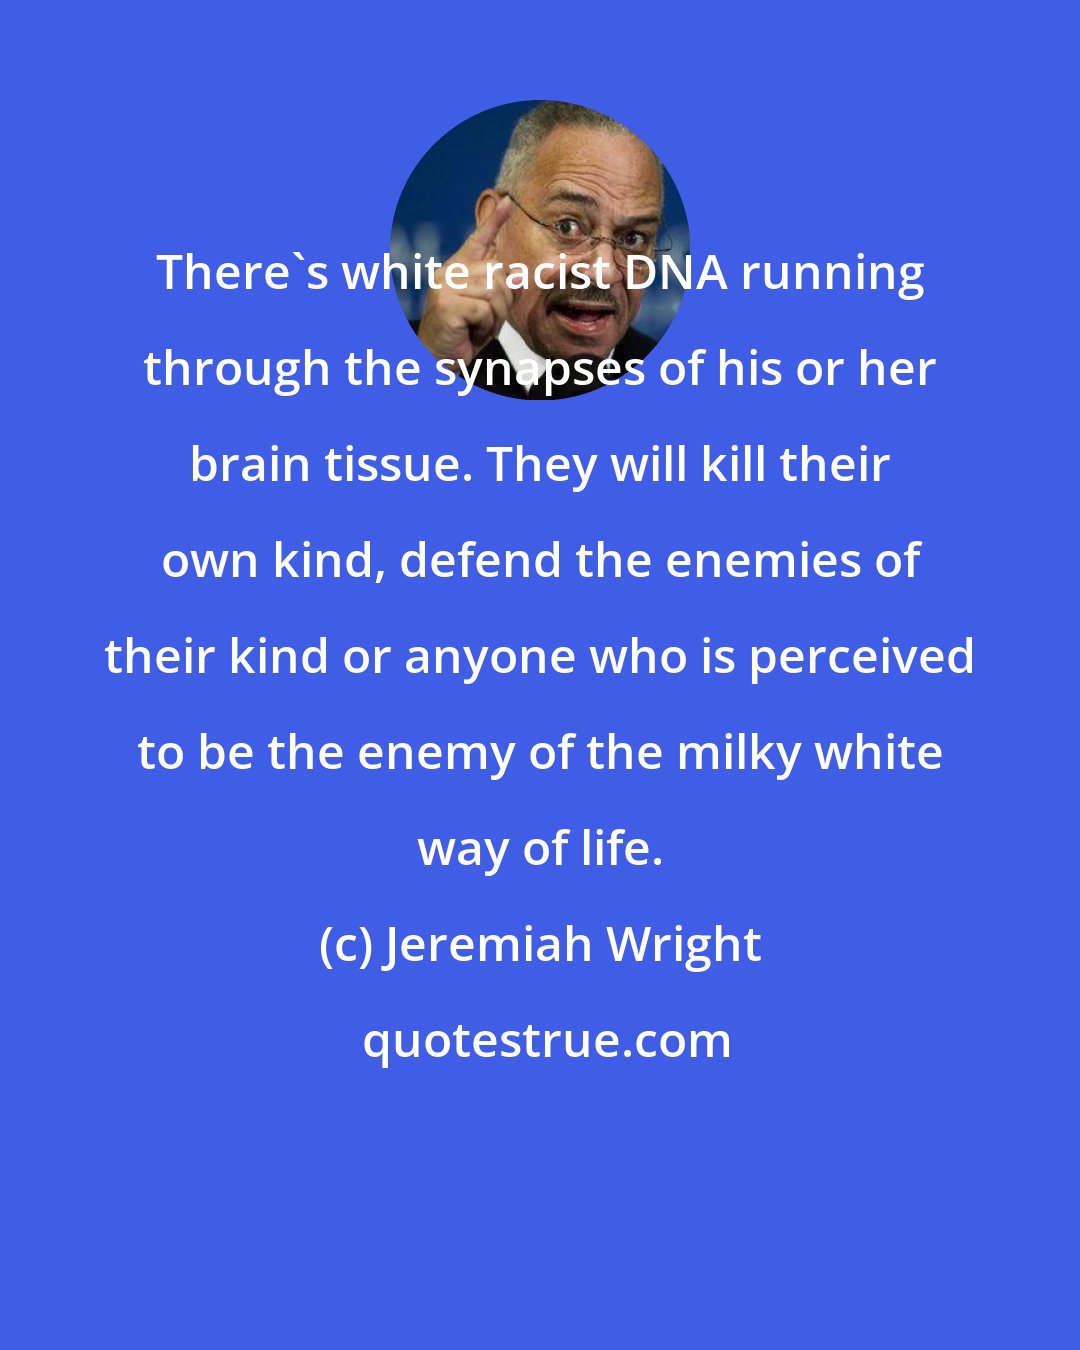 Jeremiah Wright: There's white racist DNA running through the synapses of his or her brain tissue. They will kill their own kind, defend the enemies of their kind or anyone who is perceived to be the enemy of the milky white way of life.